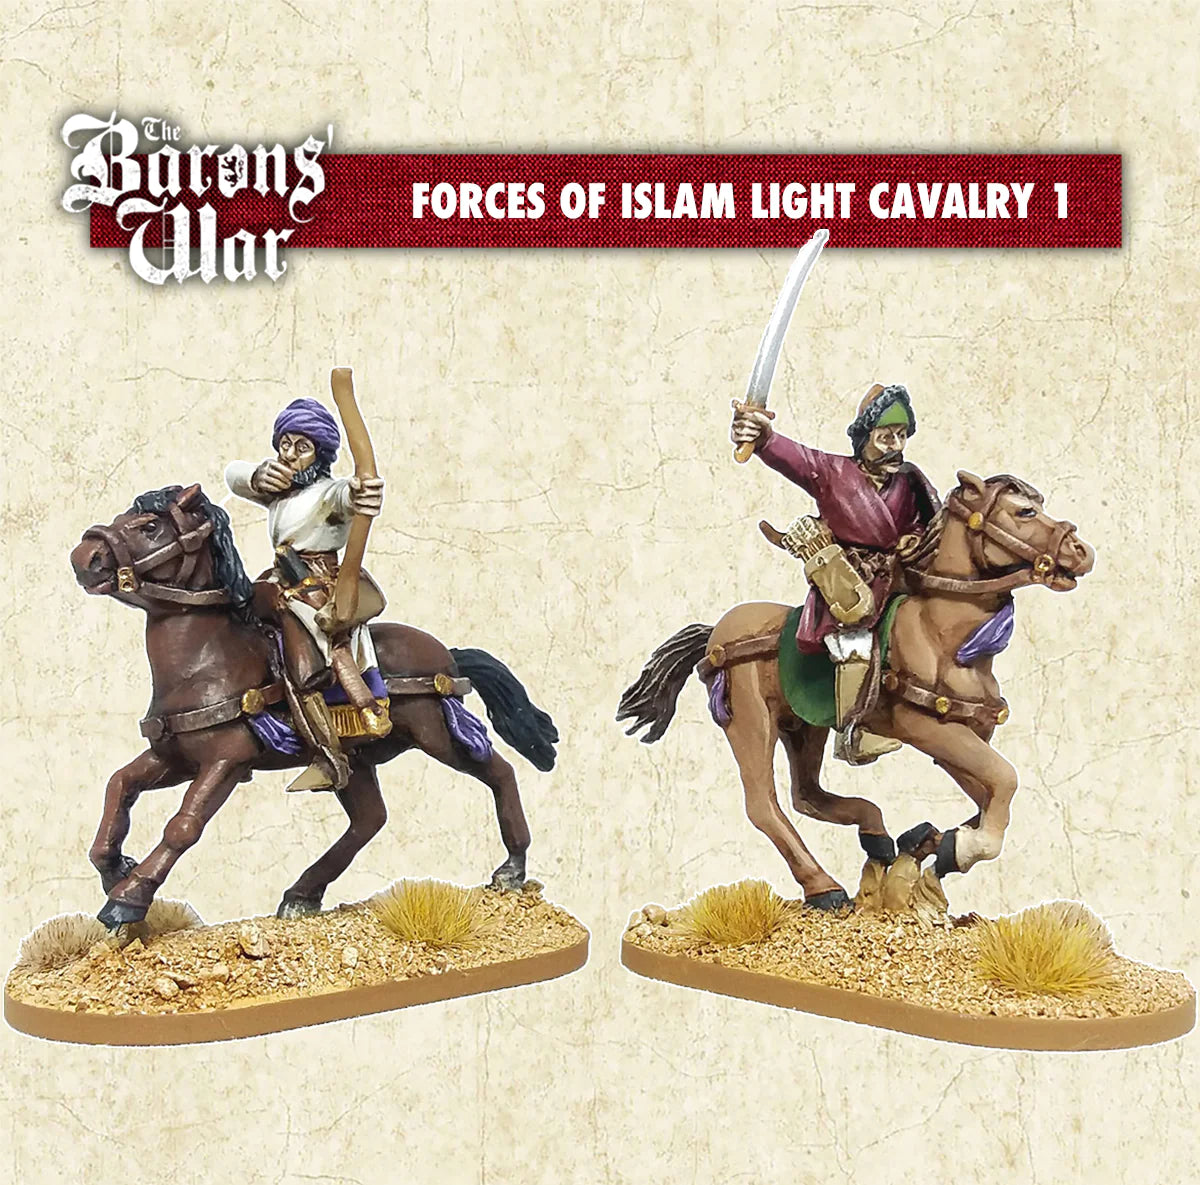 Forces of Islam Light Cavalry 1: Barons War Outremer